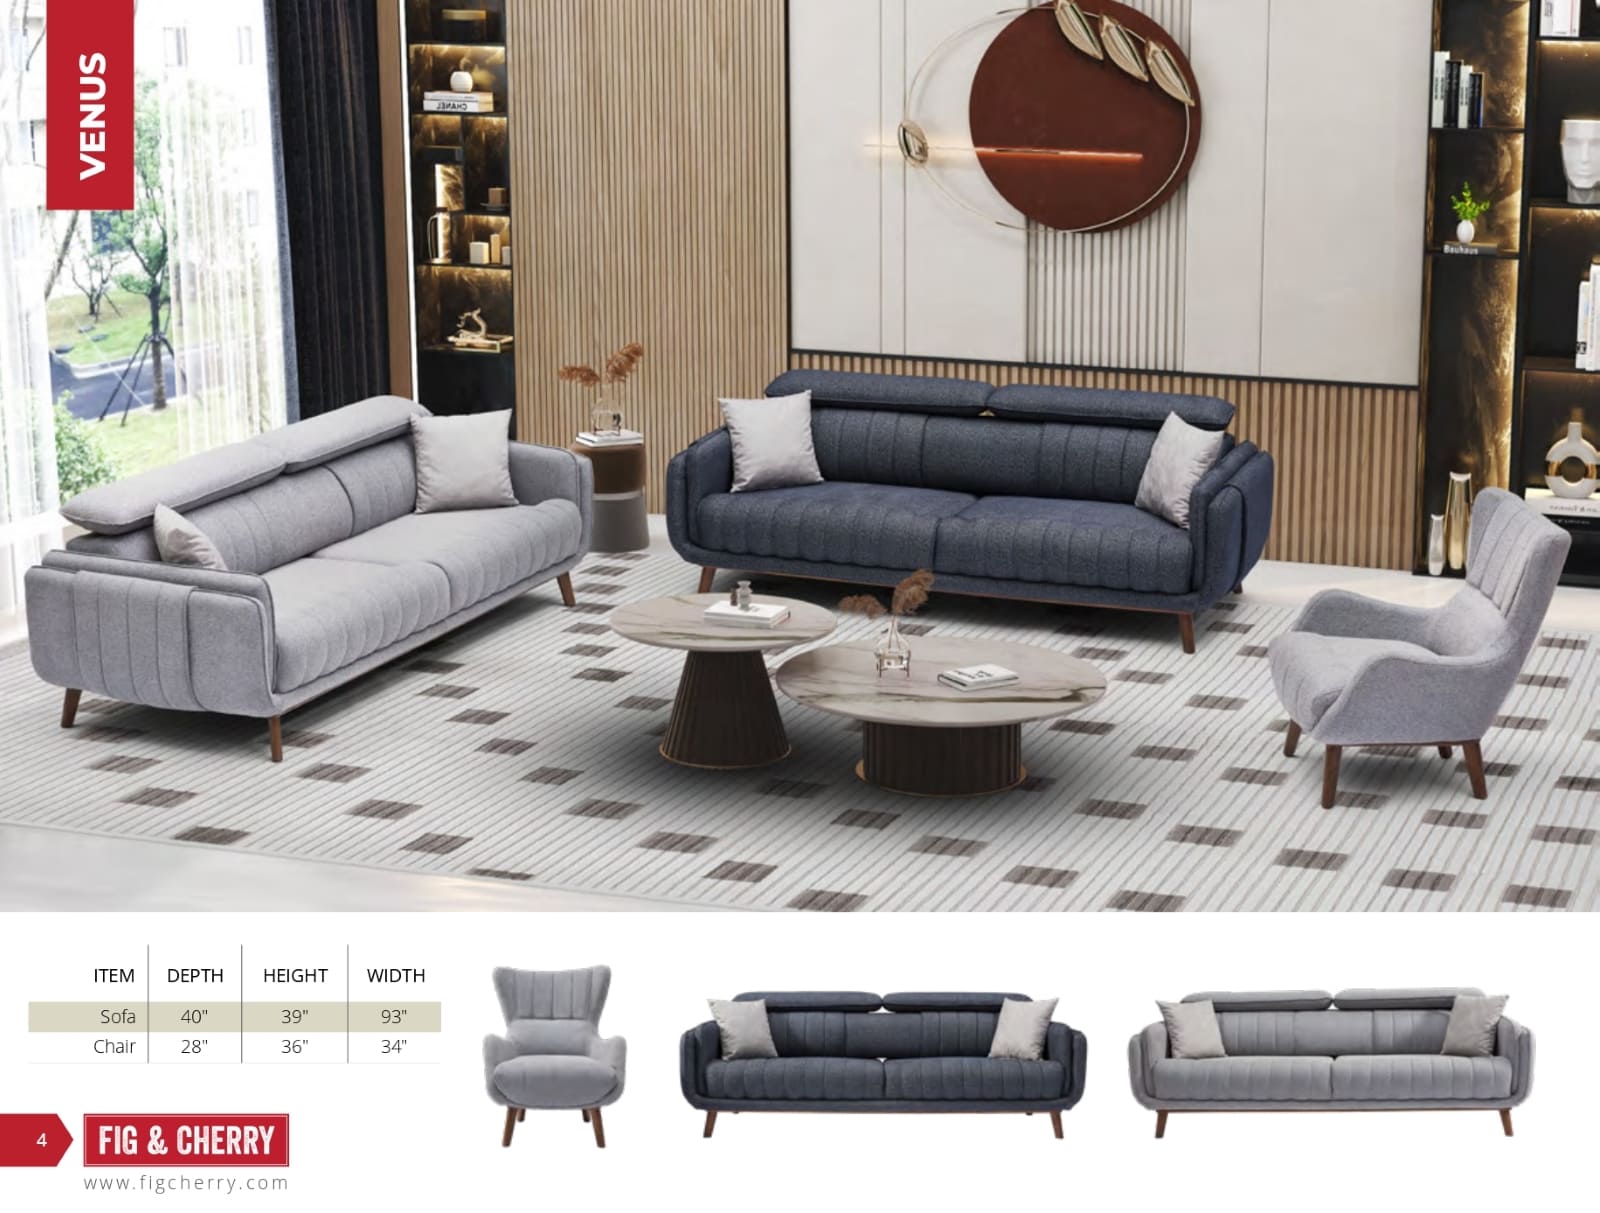 Fig & Cherry Indoor Collection (Sofas and Sectionals) Catalog (4)